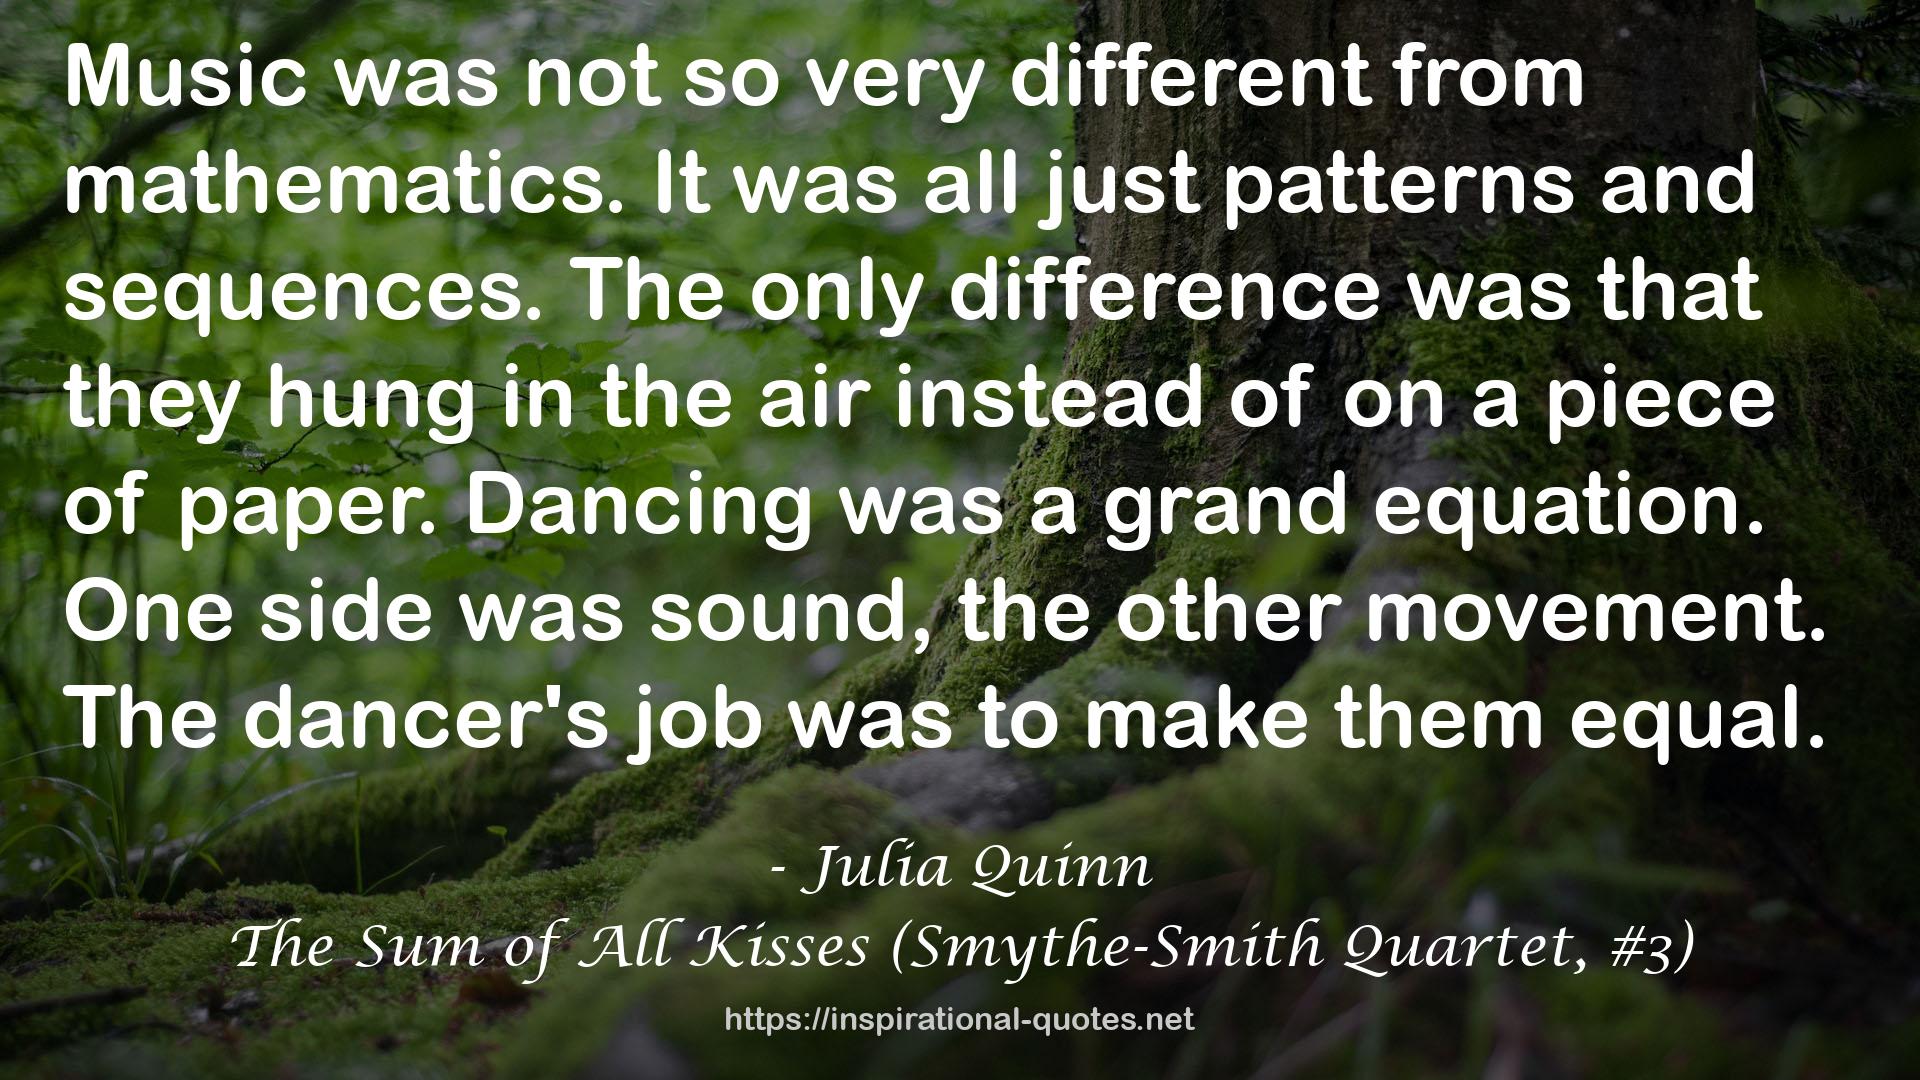 The Sum of All Kisses (Smythe-Smith Quartet, #3) QUOTES